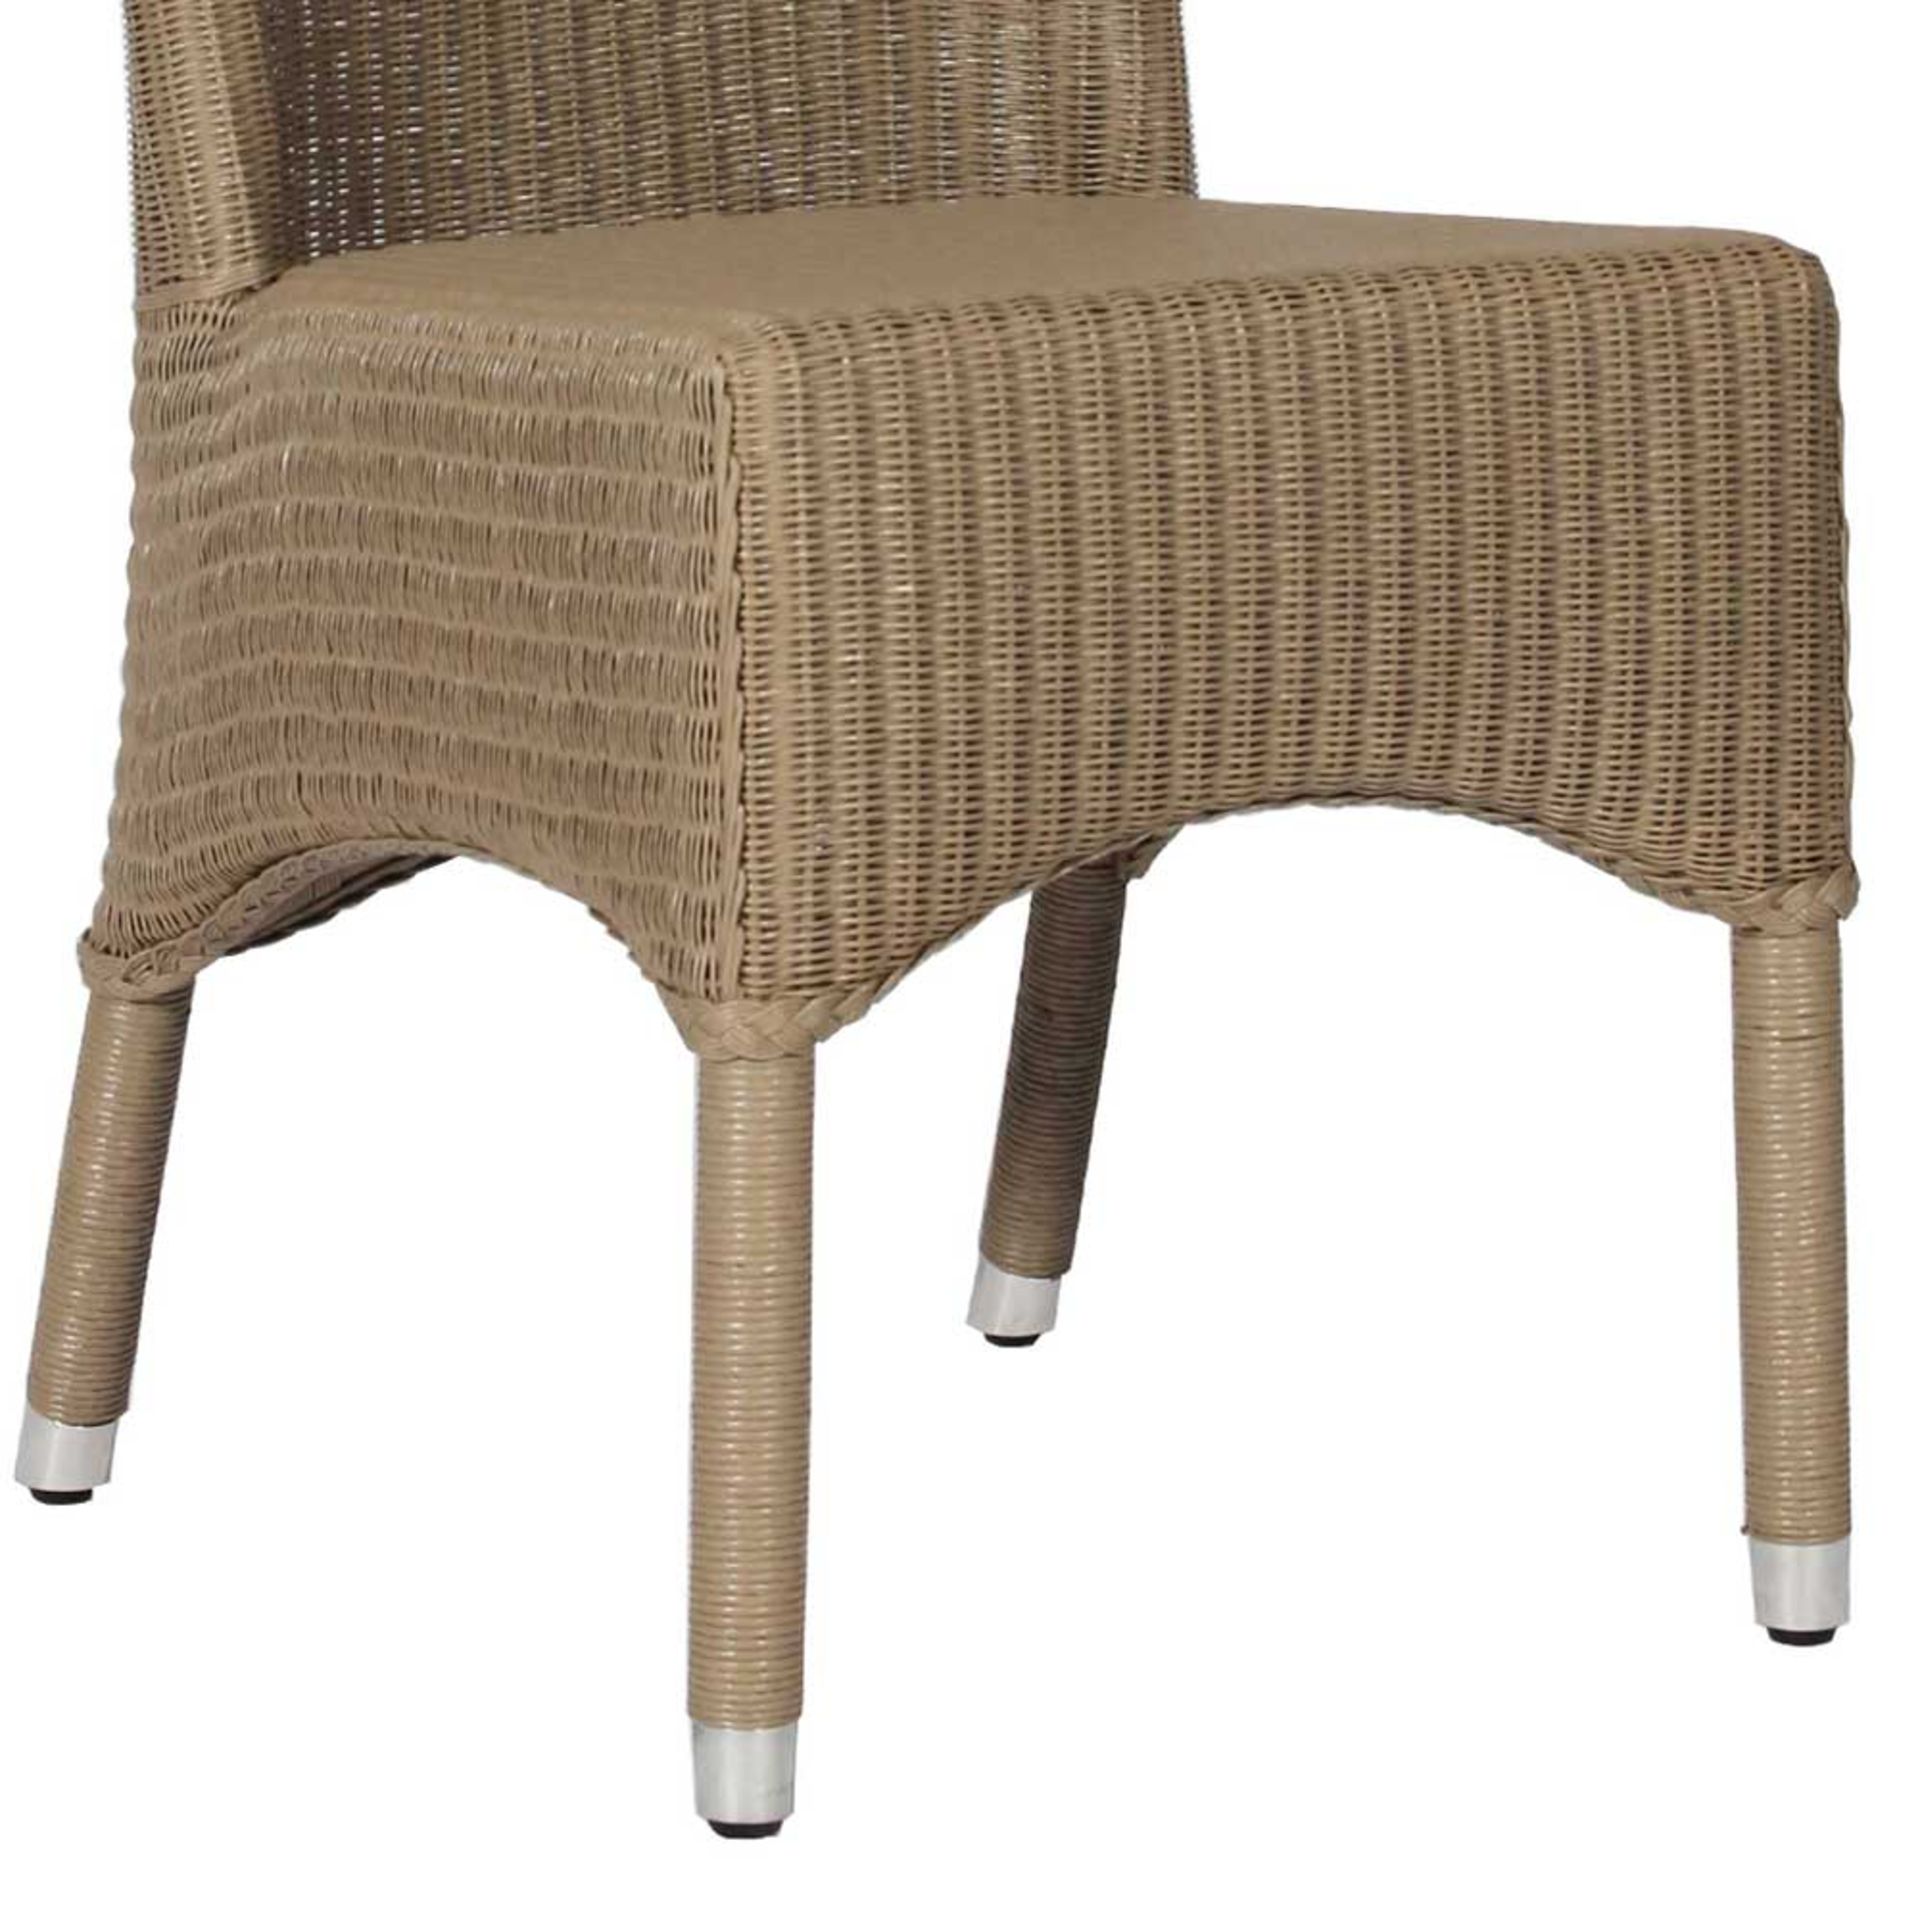 1 x Lloyd Loom Originals Sofia Woven Chair With Taupe Finish - RRP £198! - Image 2 of 3